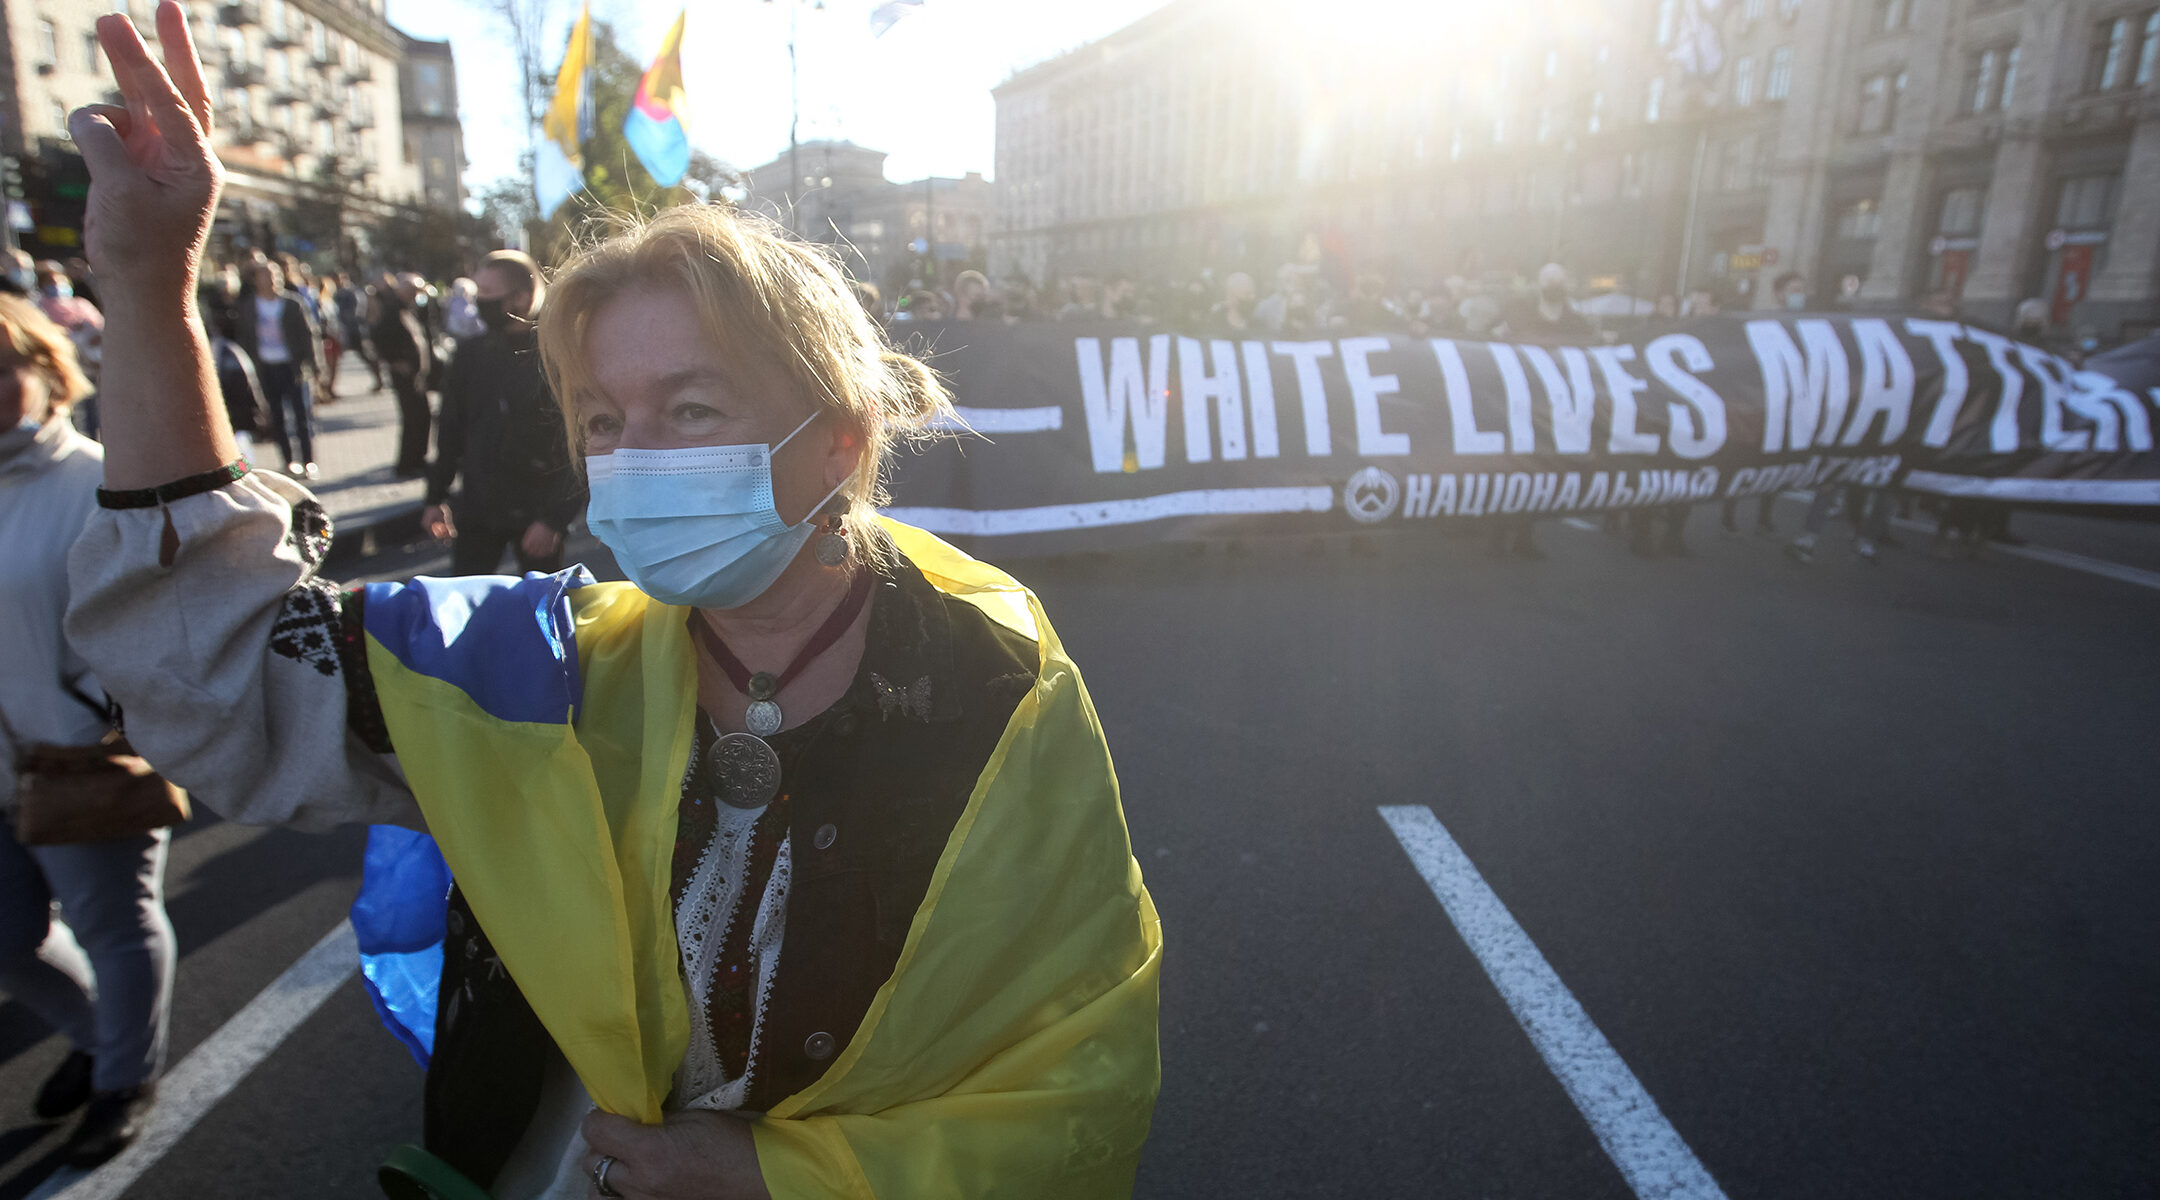 A woman wearing a Ukrainian flag performs an ultranationalist gesture while marching at an event honoring collaborators with Nazi Germany in Kyiv, Ukraine on Oct. 14, 2020. (STR/NurPhoto via Getty Images)